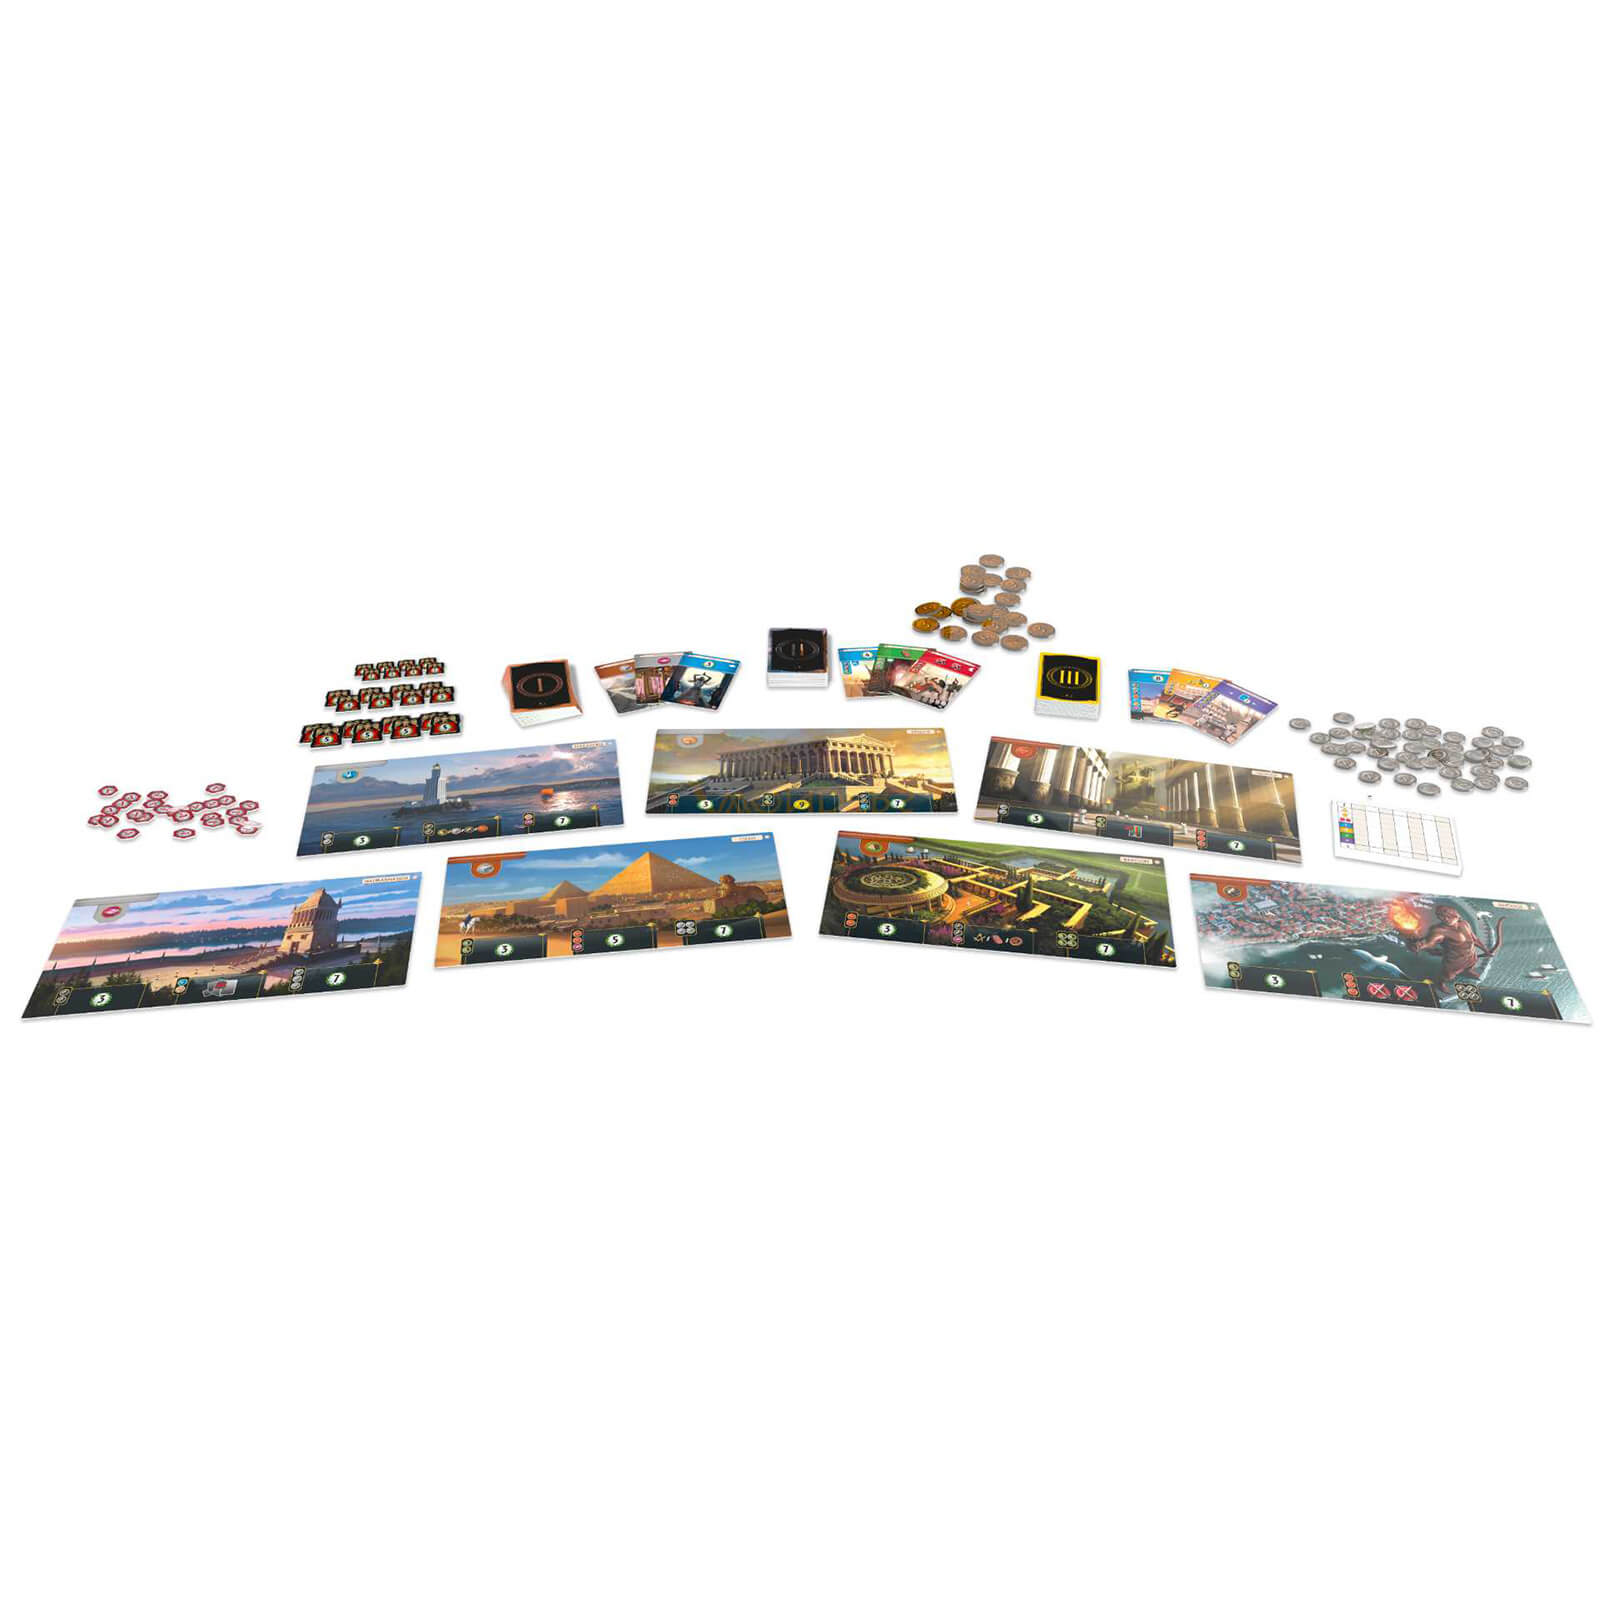 7 Wonders Board Game - 2nd Edition